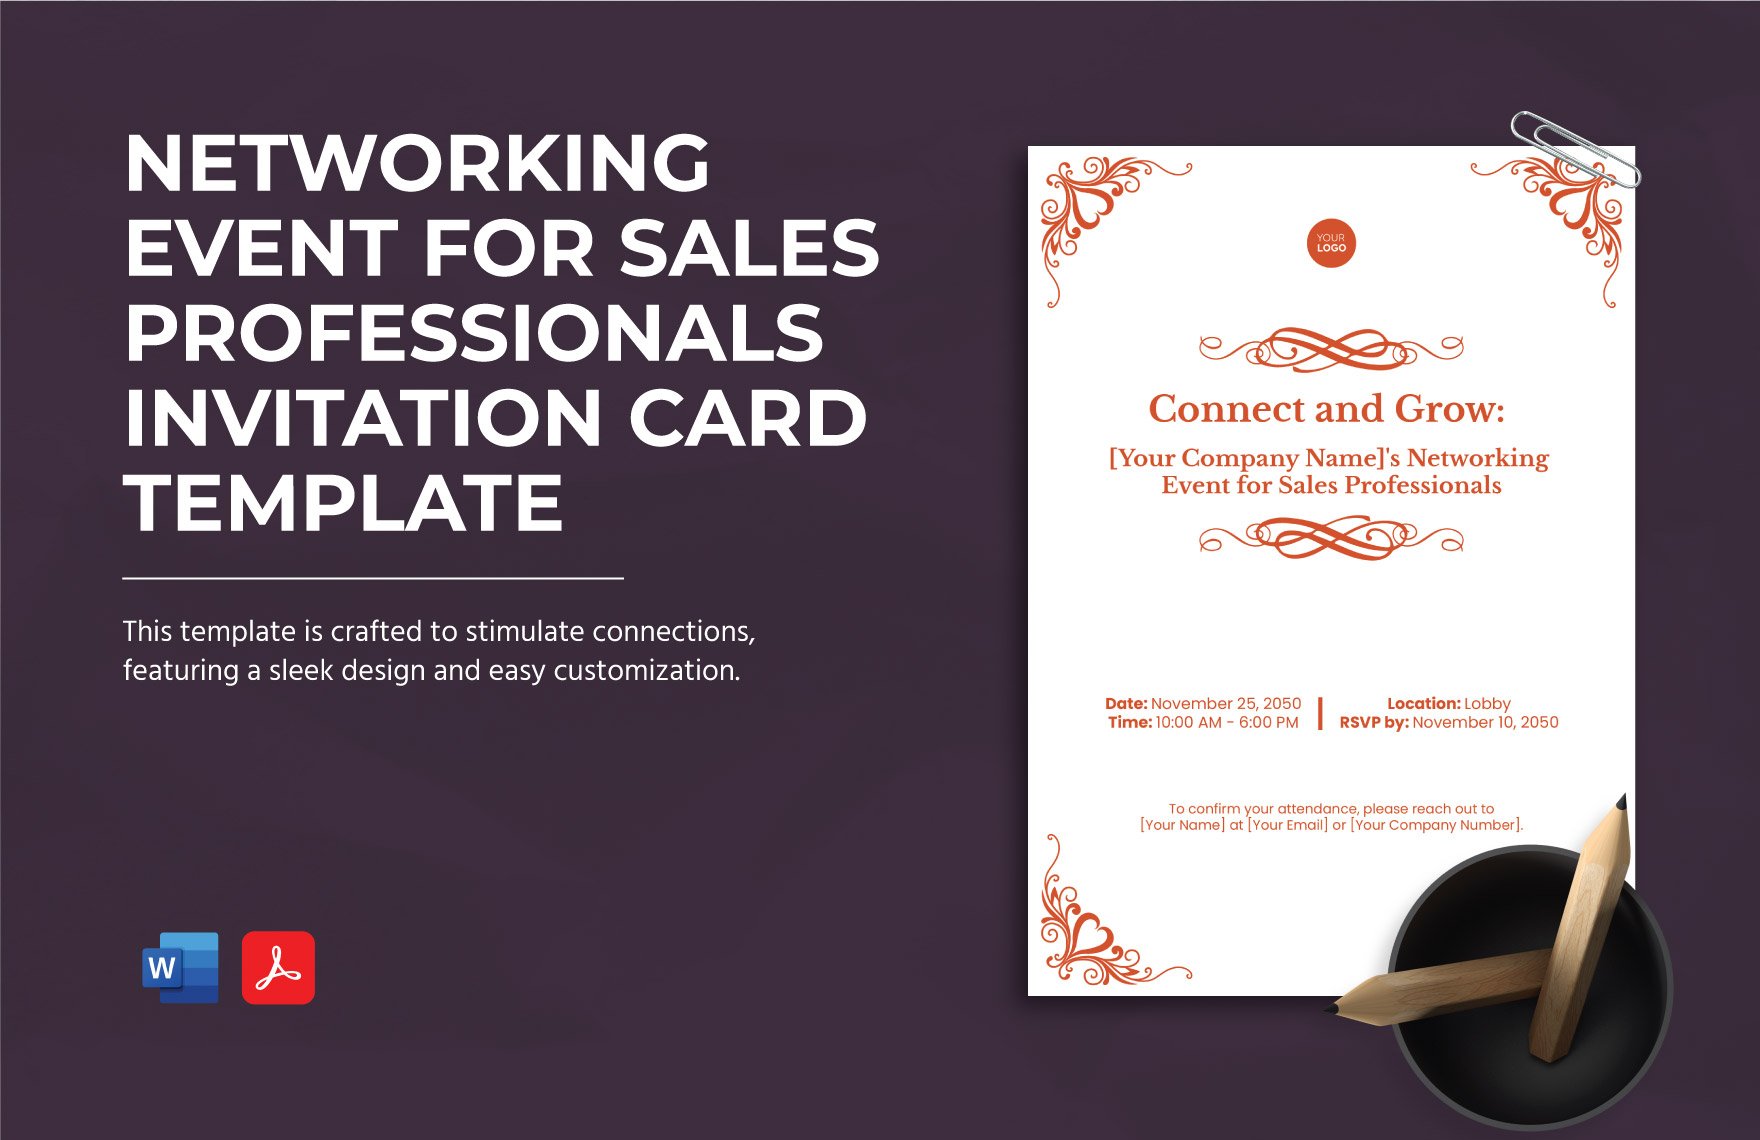 Networking Event for Sales Professionals Invitation Card Template